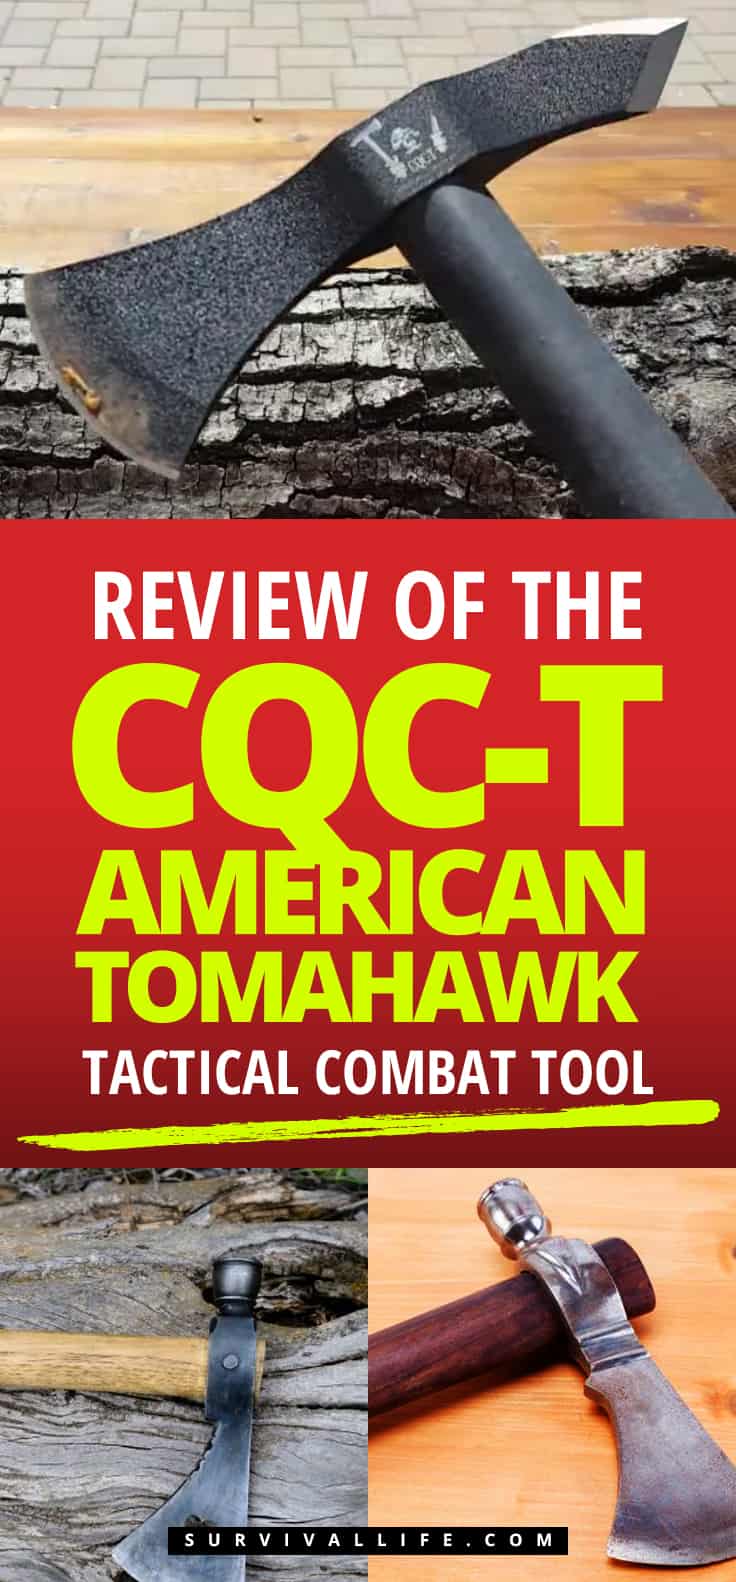 Review of the CQC-T American Tomahawk Tactical Combat Tool